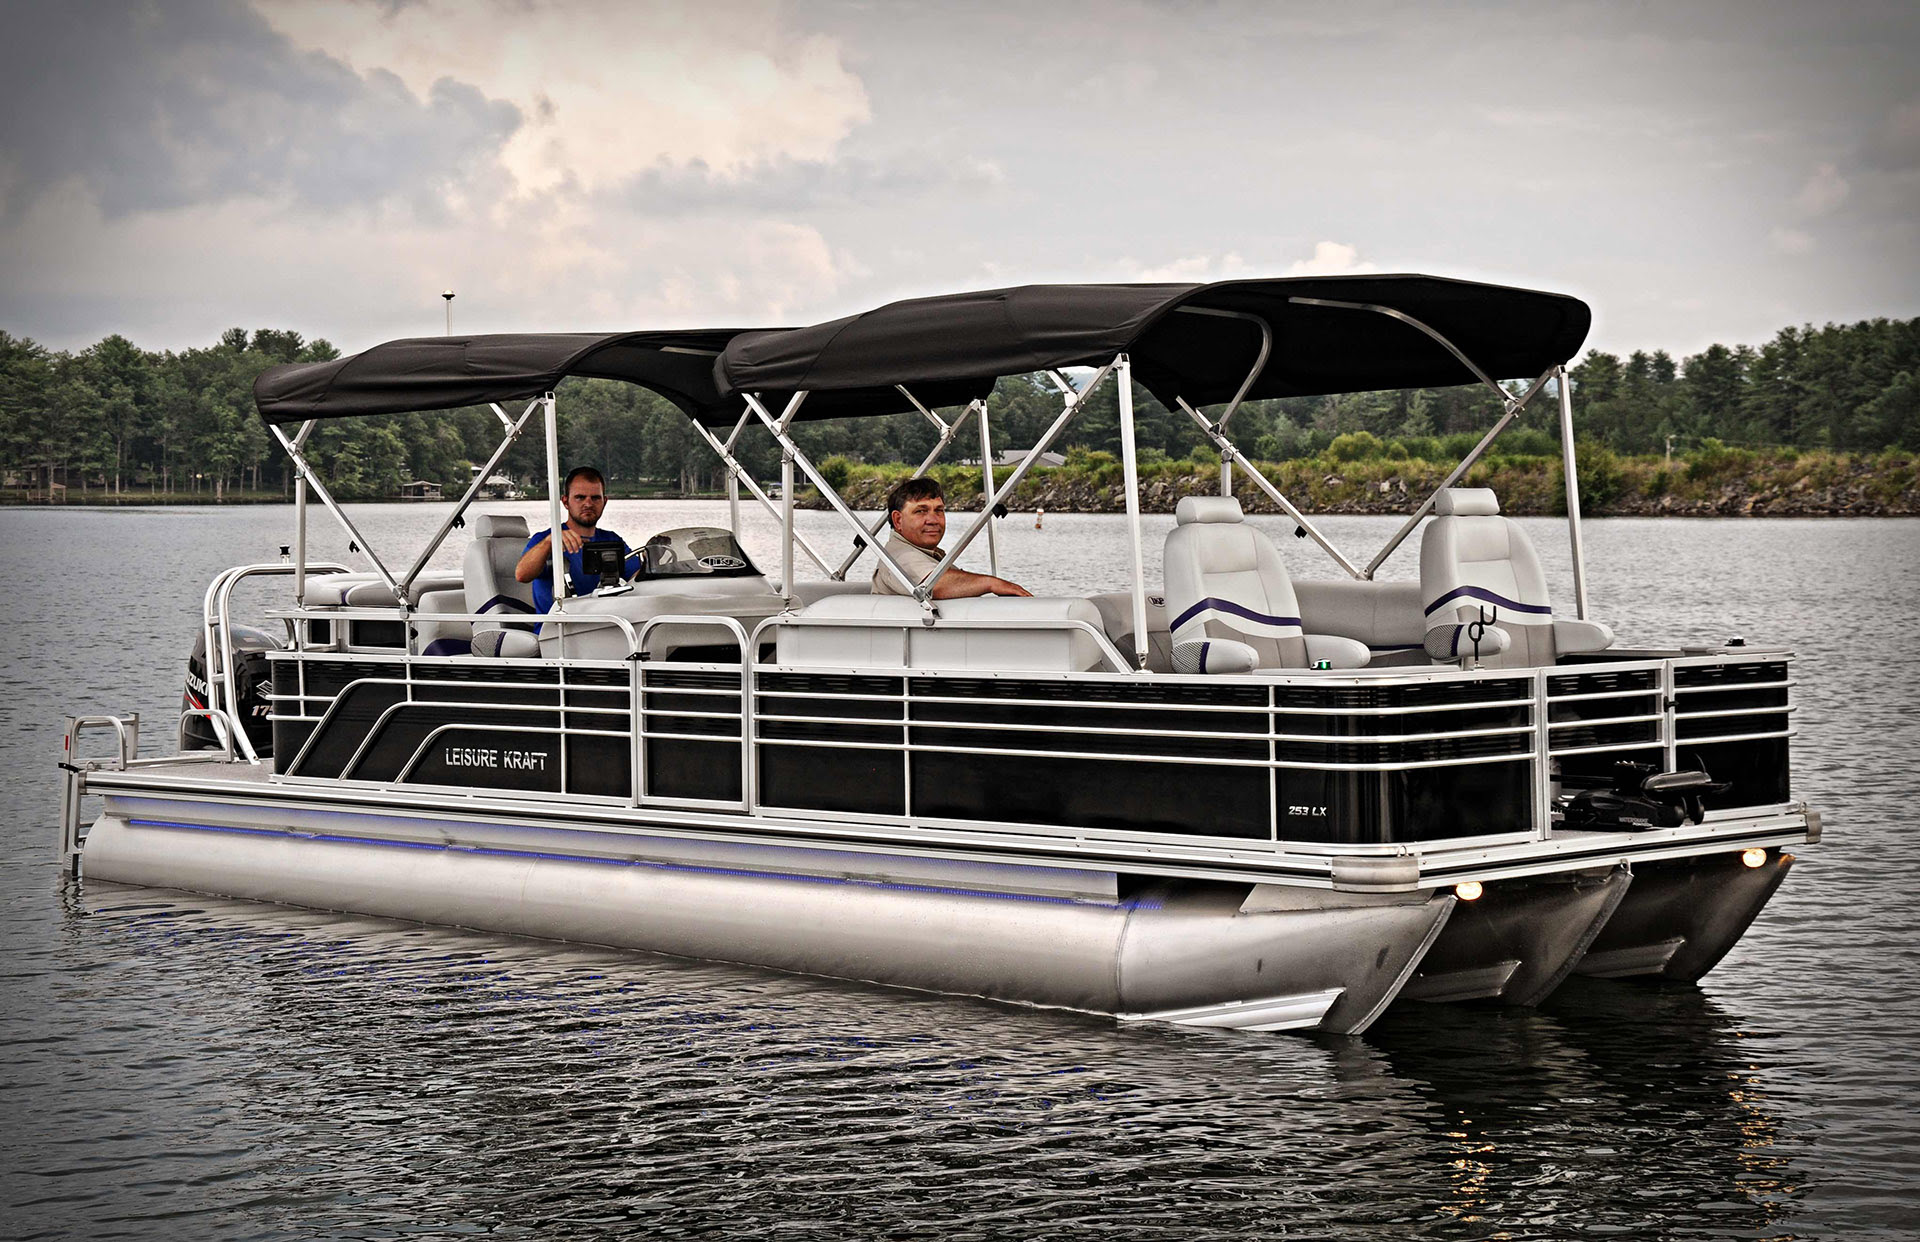 ... - 20 Years of Experience as a High Quality Pontoon Boat Manufacturer